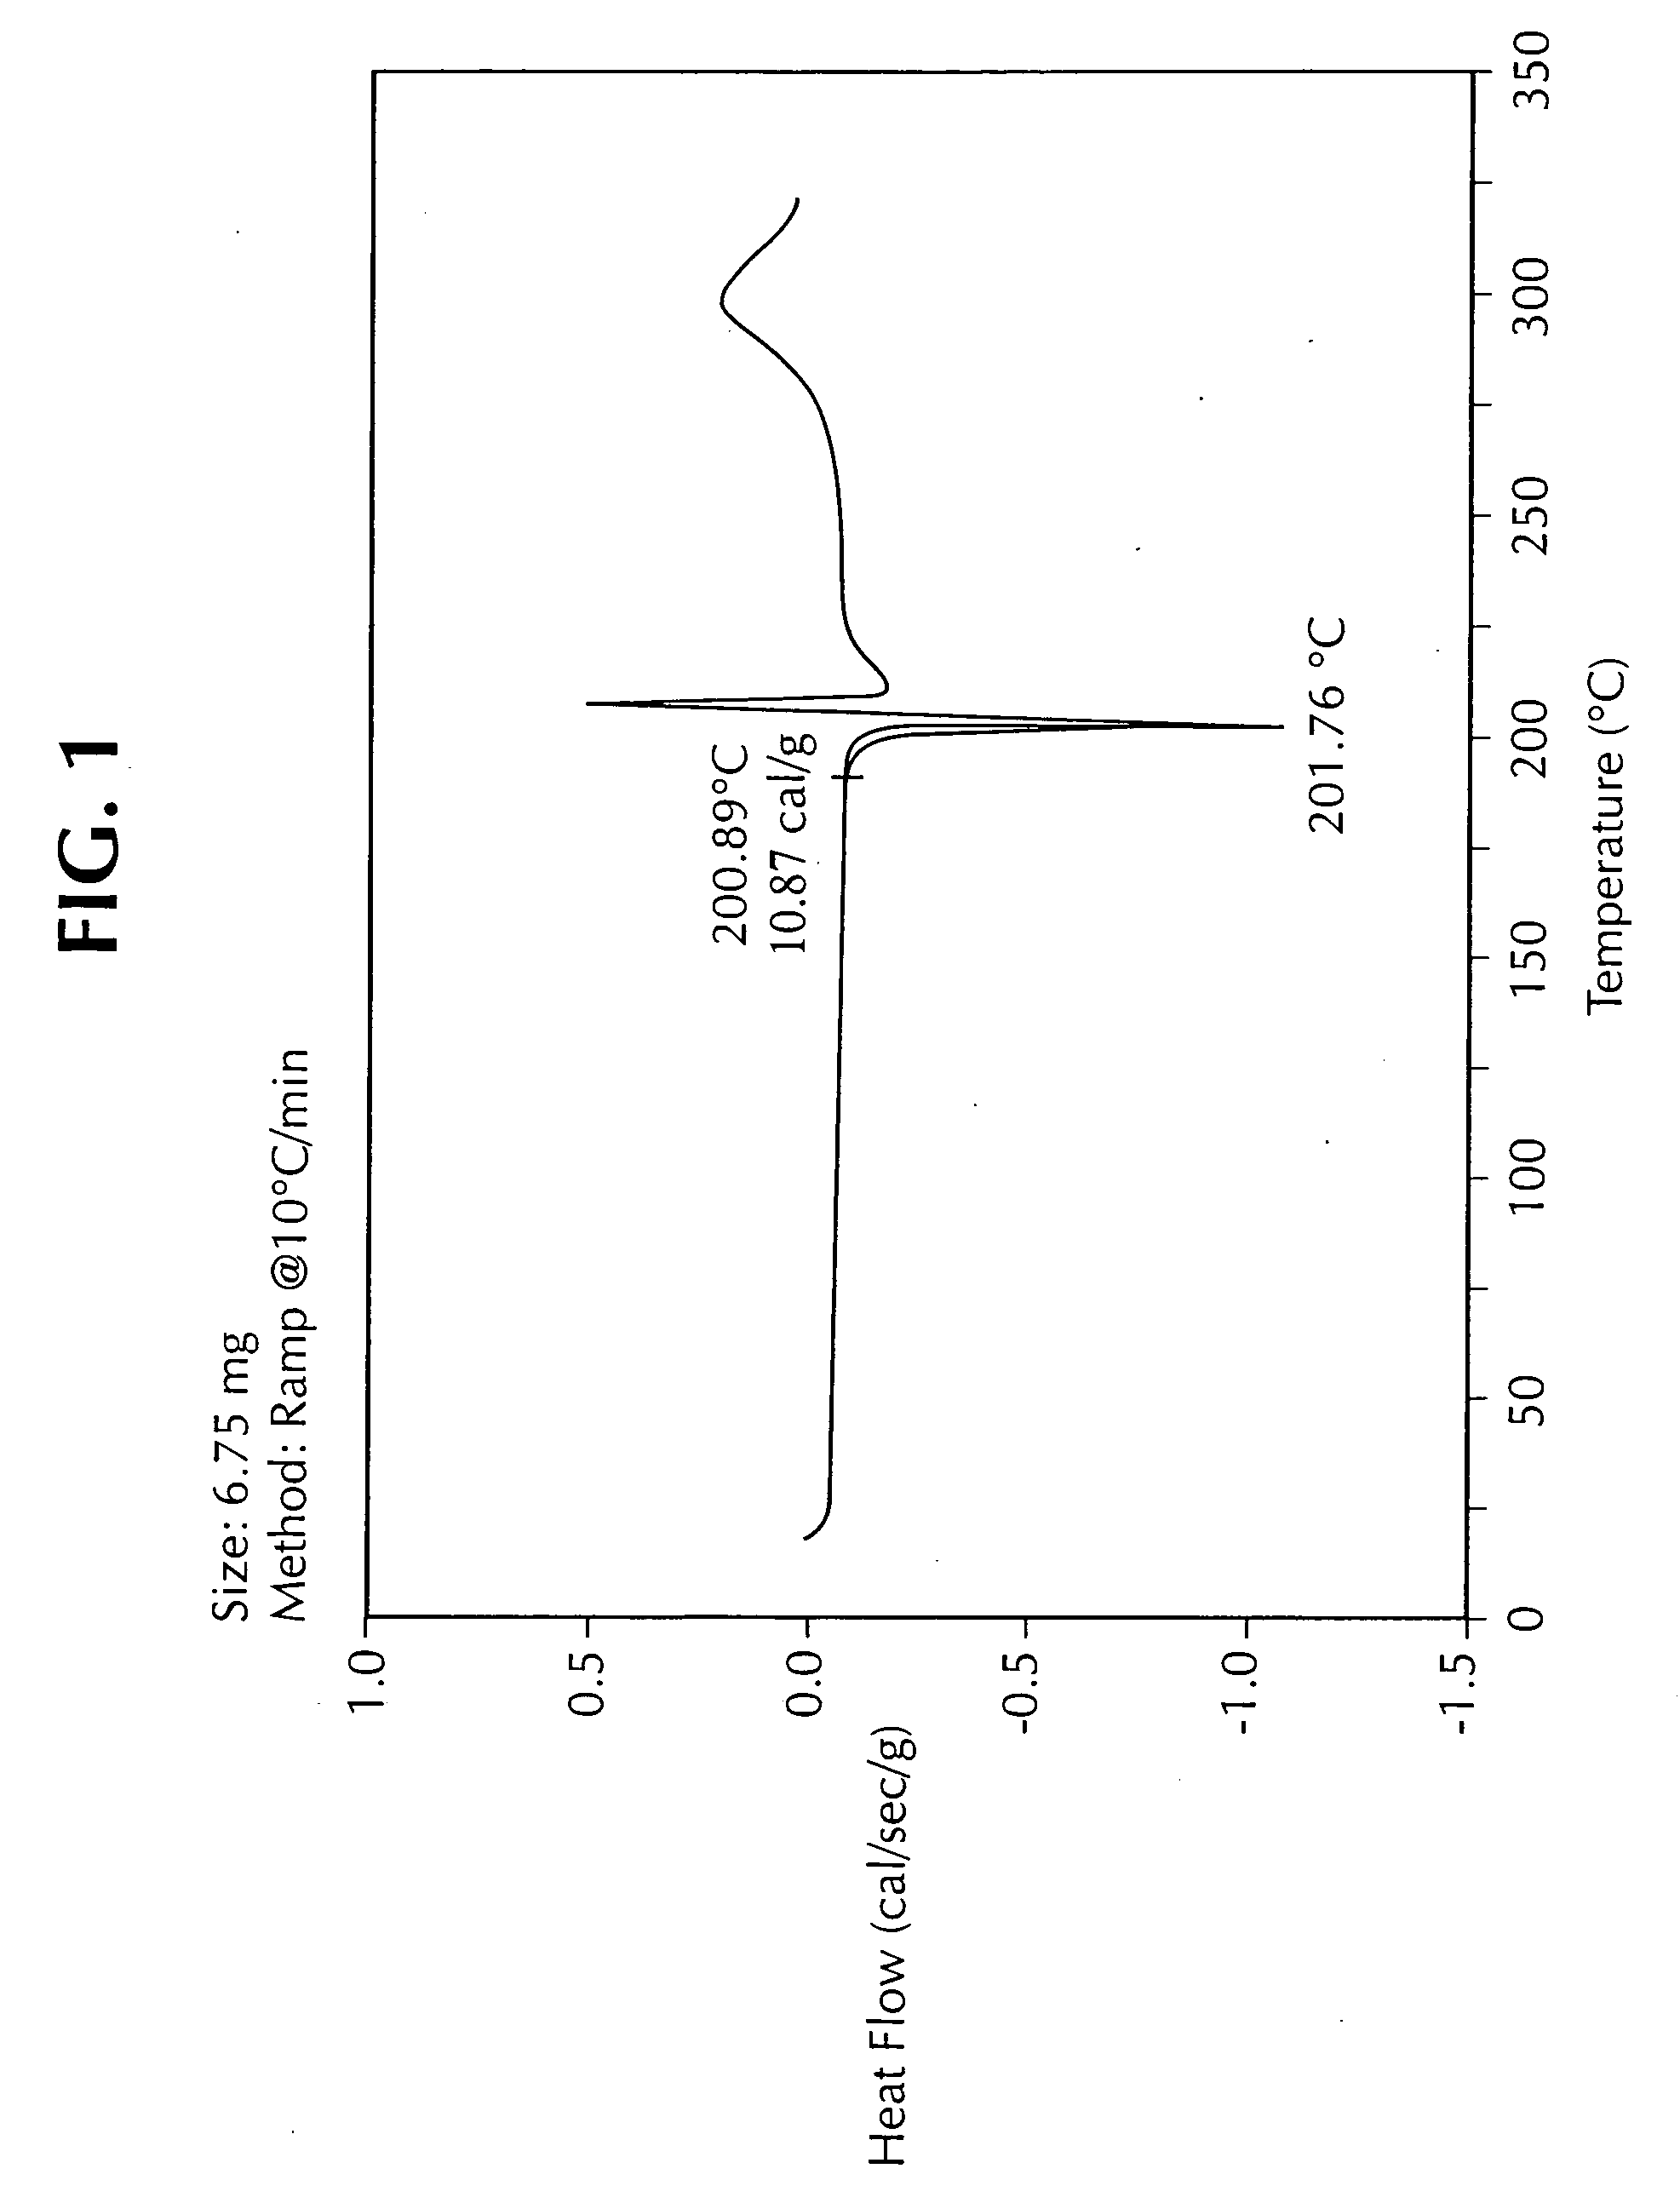 Methods of synthesizing substituted 3-cyanoquinolines and intermediates thereof